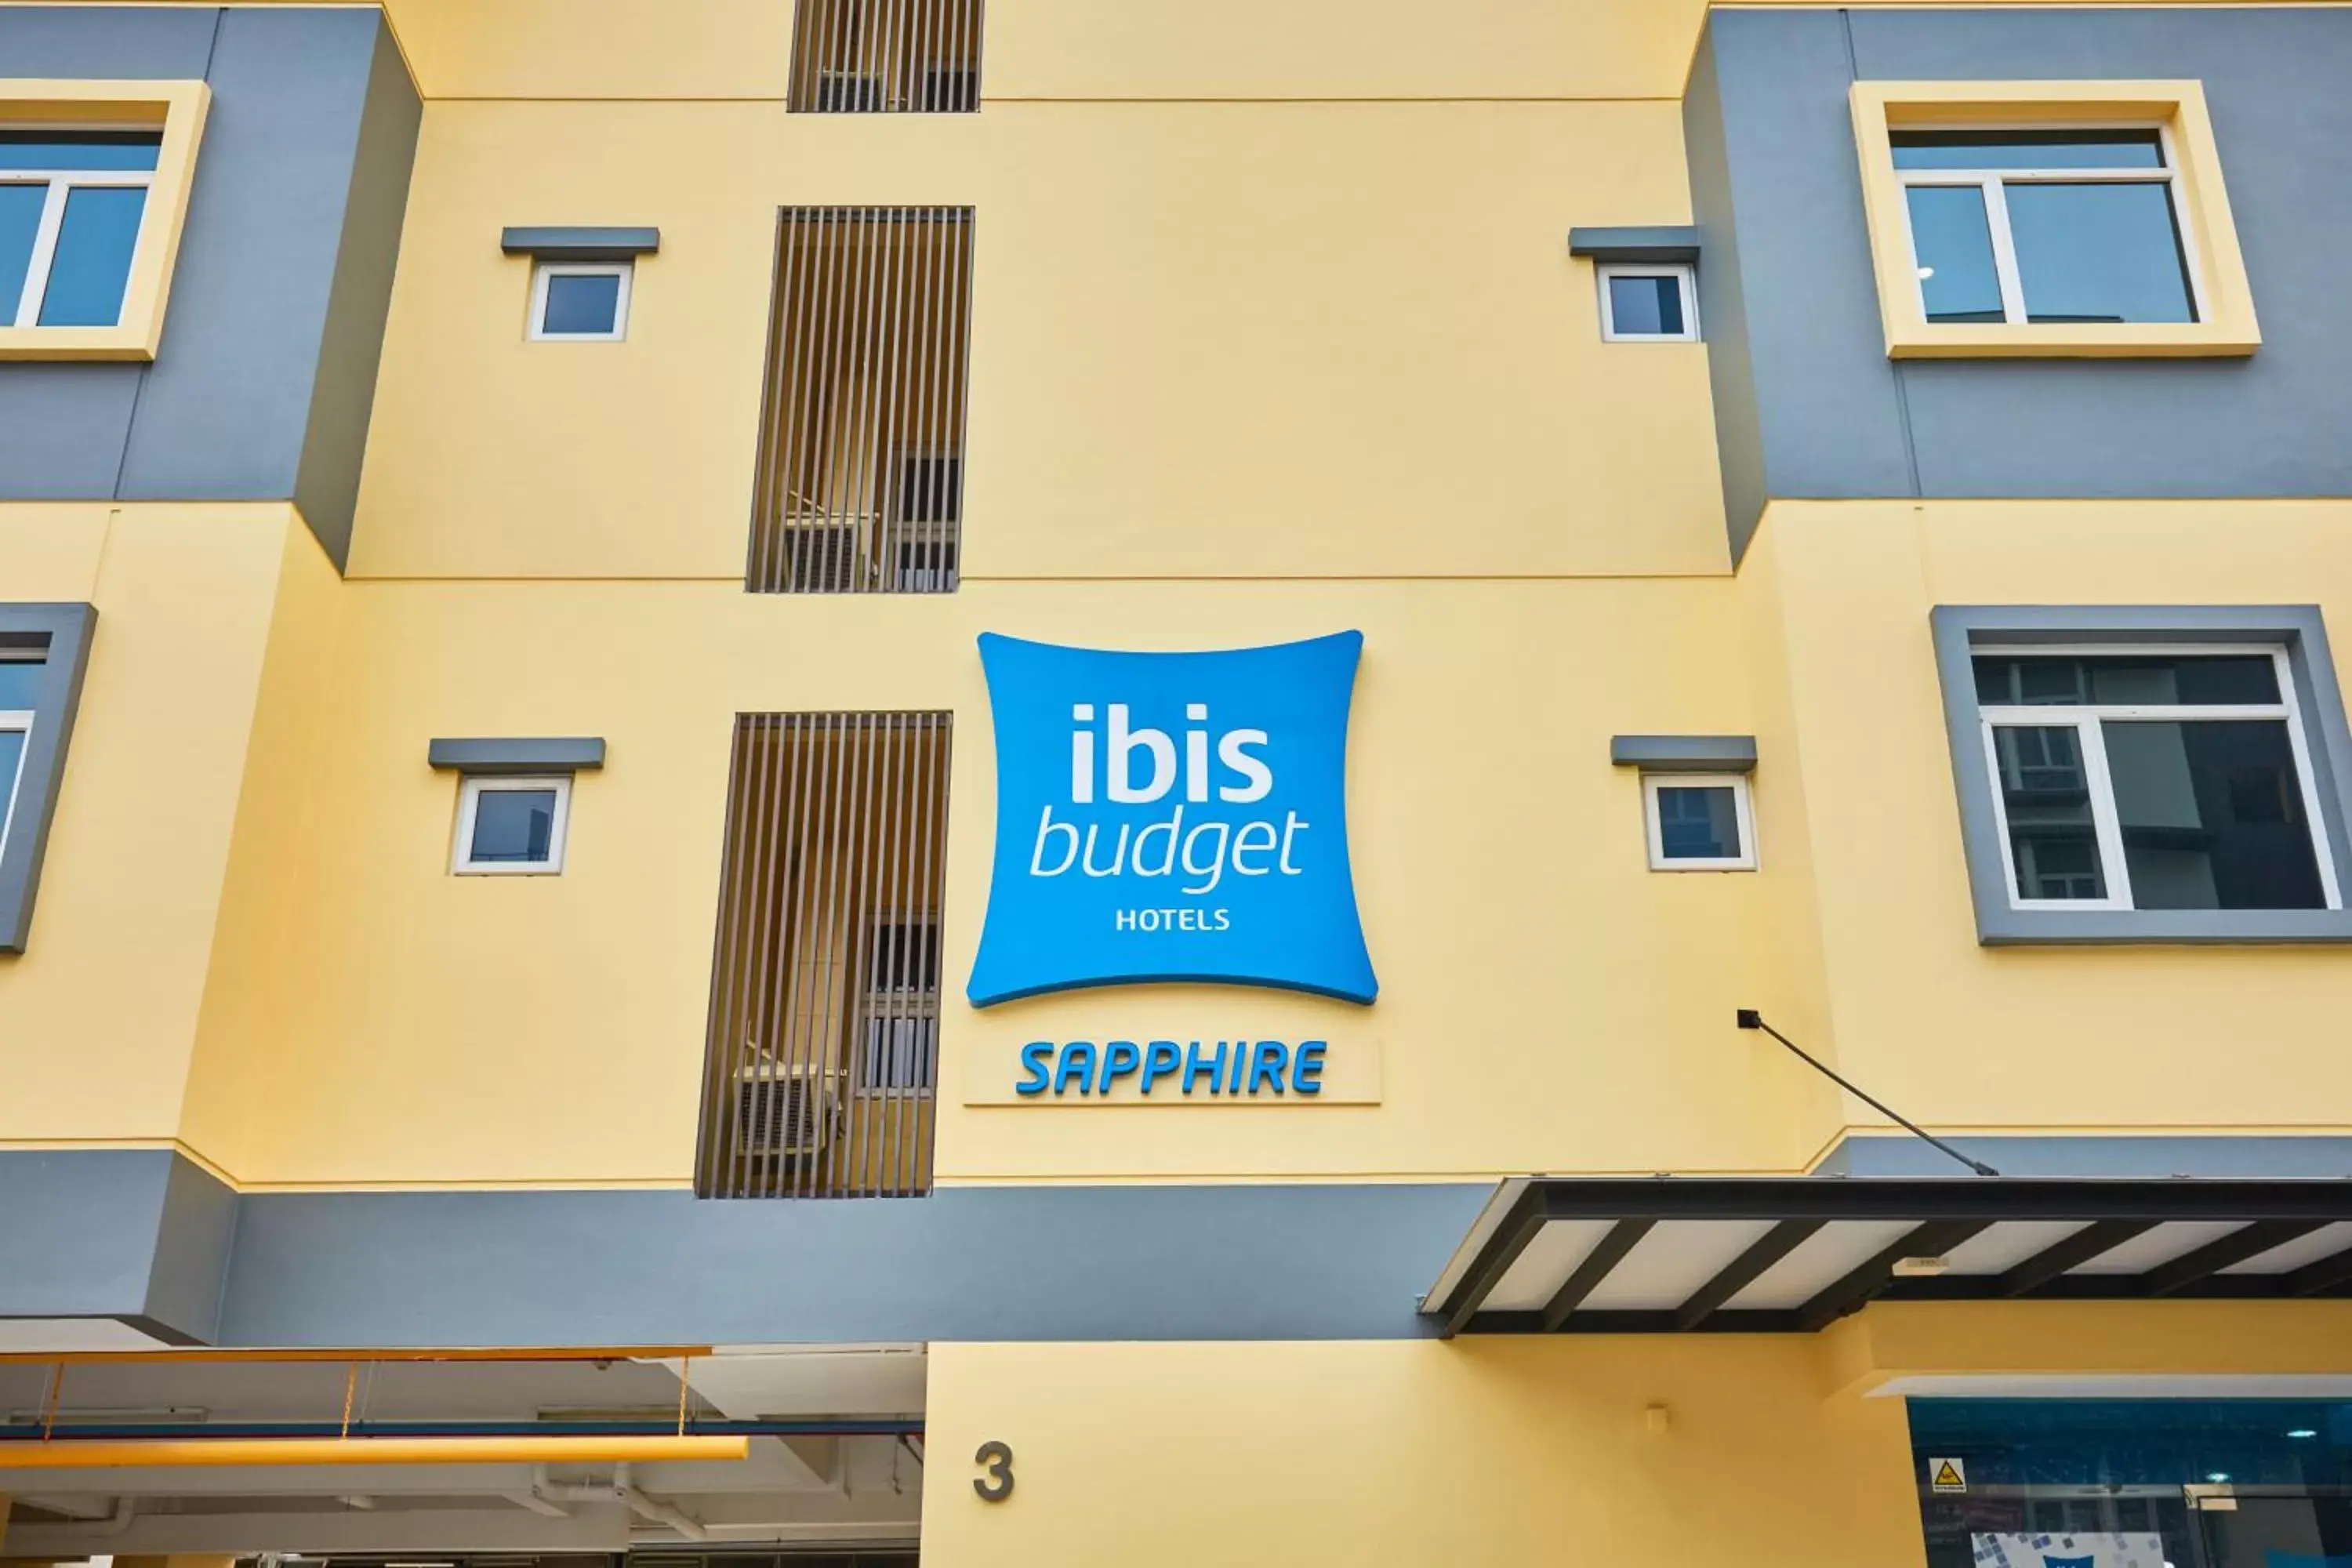 Facade/entrance, Property Building in ibis budget Singapore Sapphire